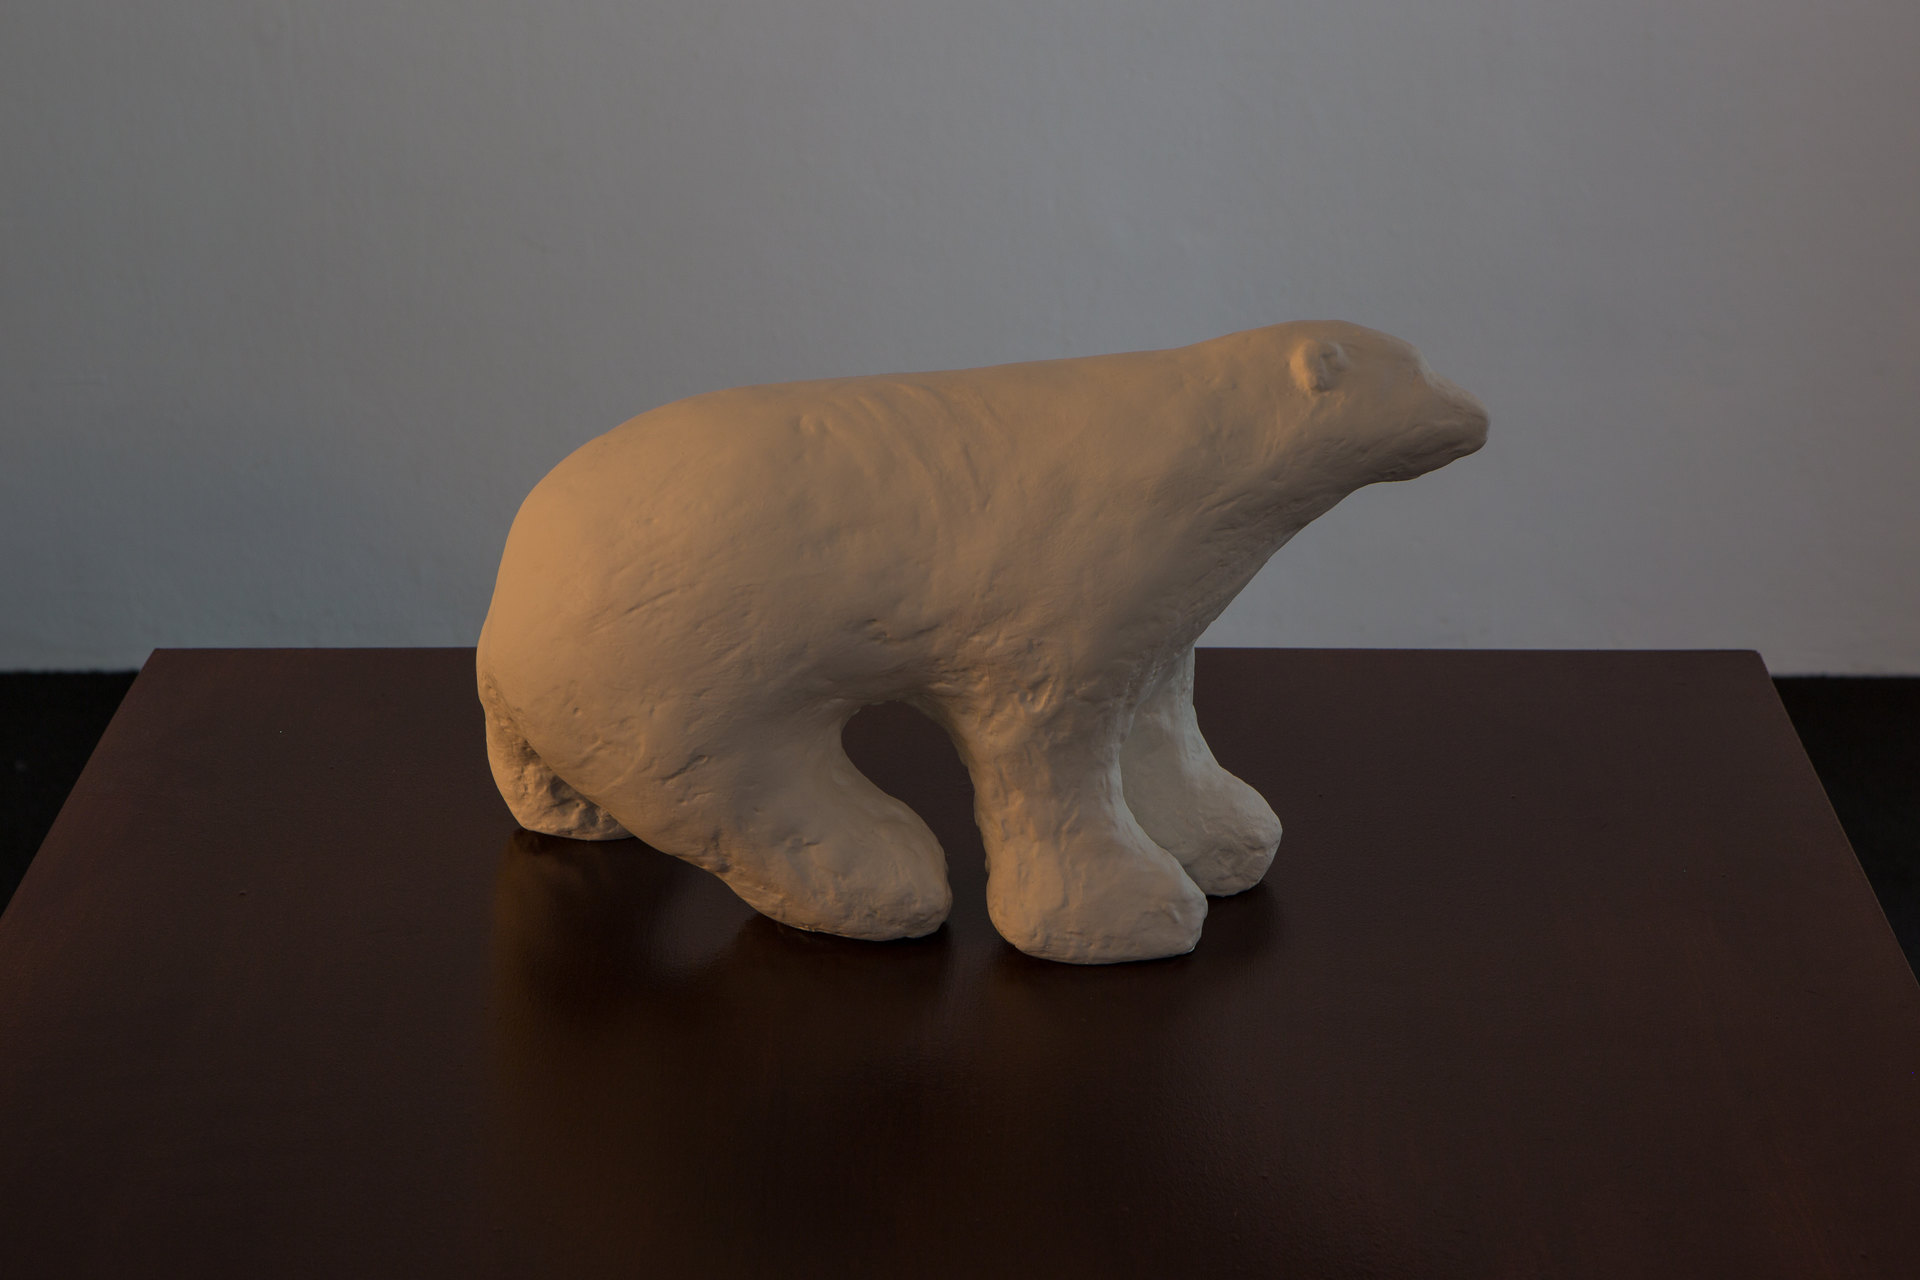 Angharad Williams and Mathis Gasser, 'Polar Bear', 2018, Hergest:Nant, Cell Project Space